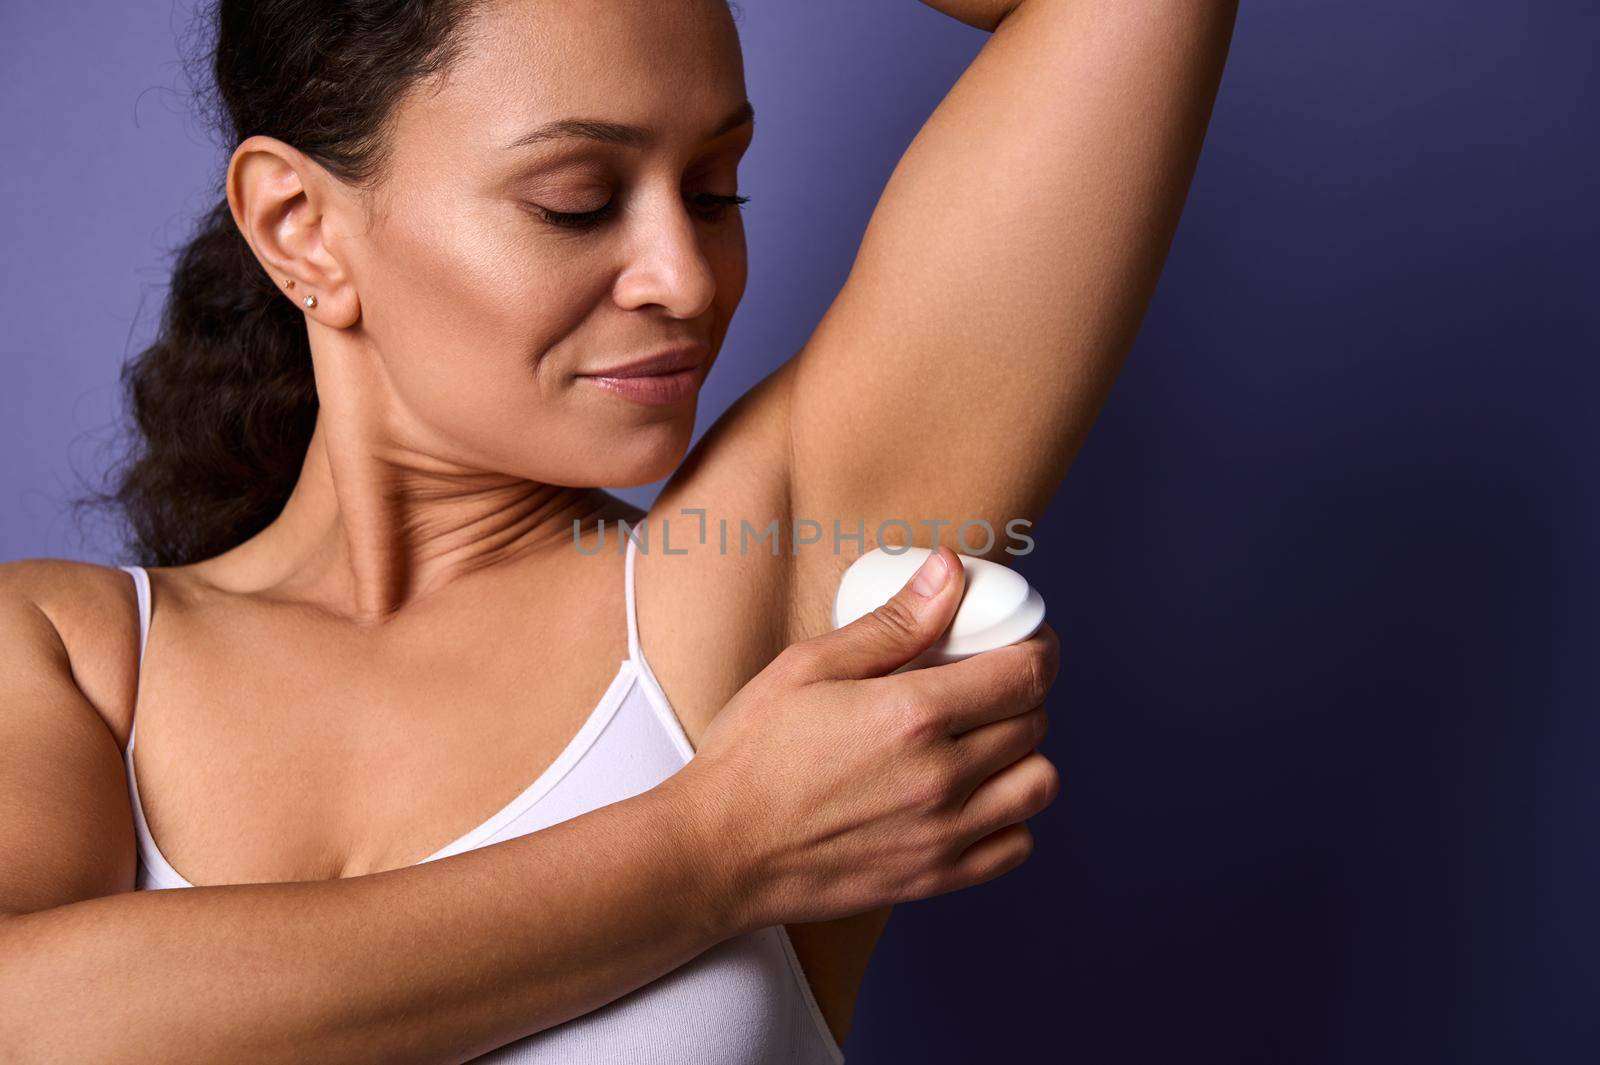 Close-up of a beautiful woman applying roll-on antiperspirant underarm. Protective sweating cosmetic product, personal hygiene, grooming self-care concept on violet background with copy ad space by artgf